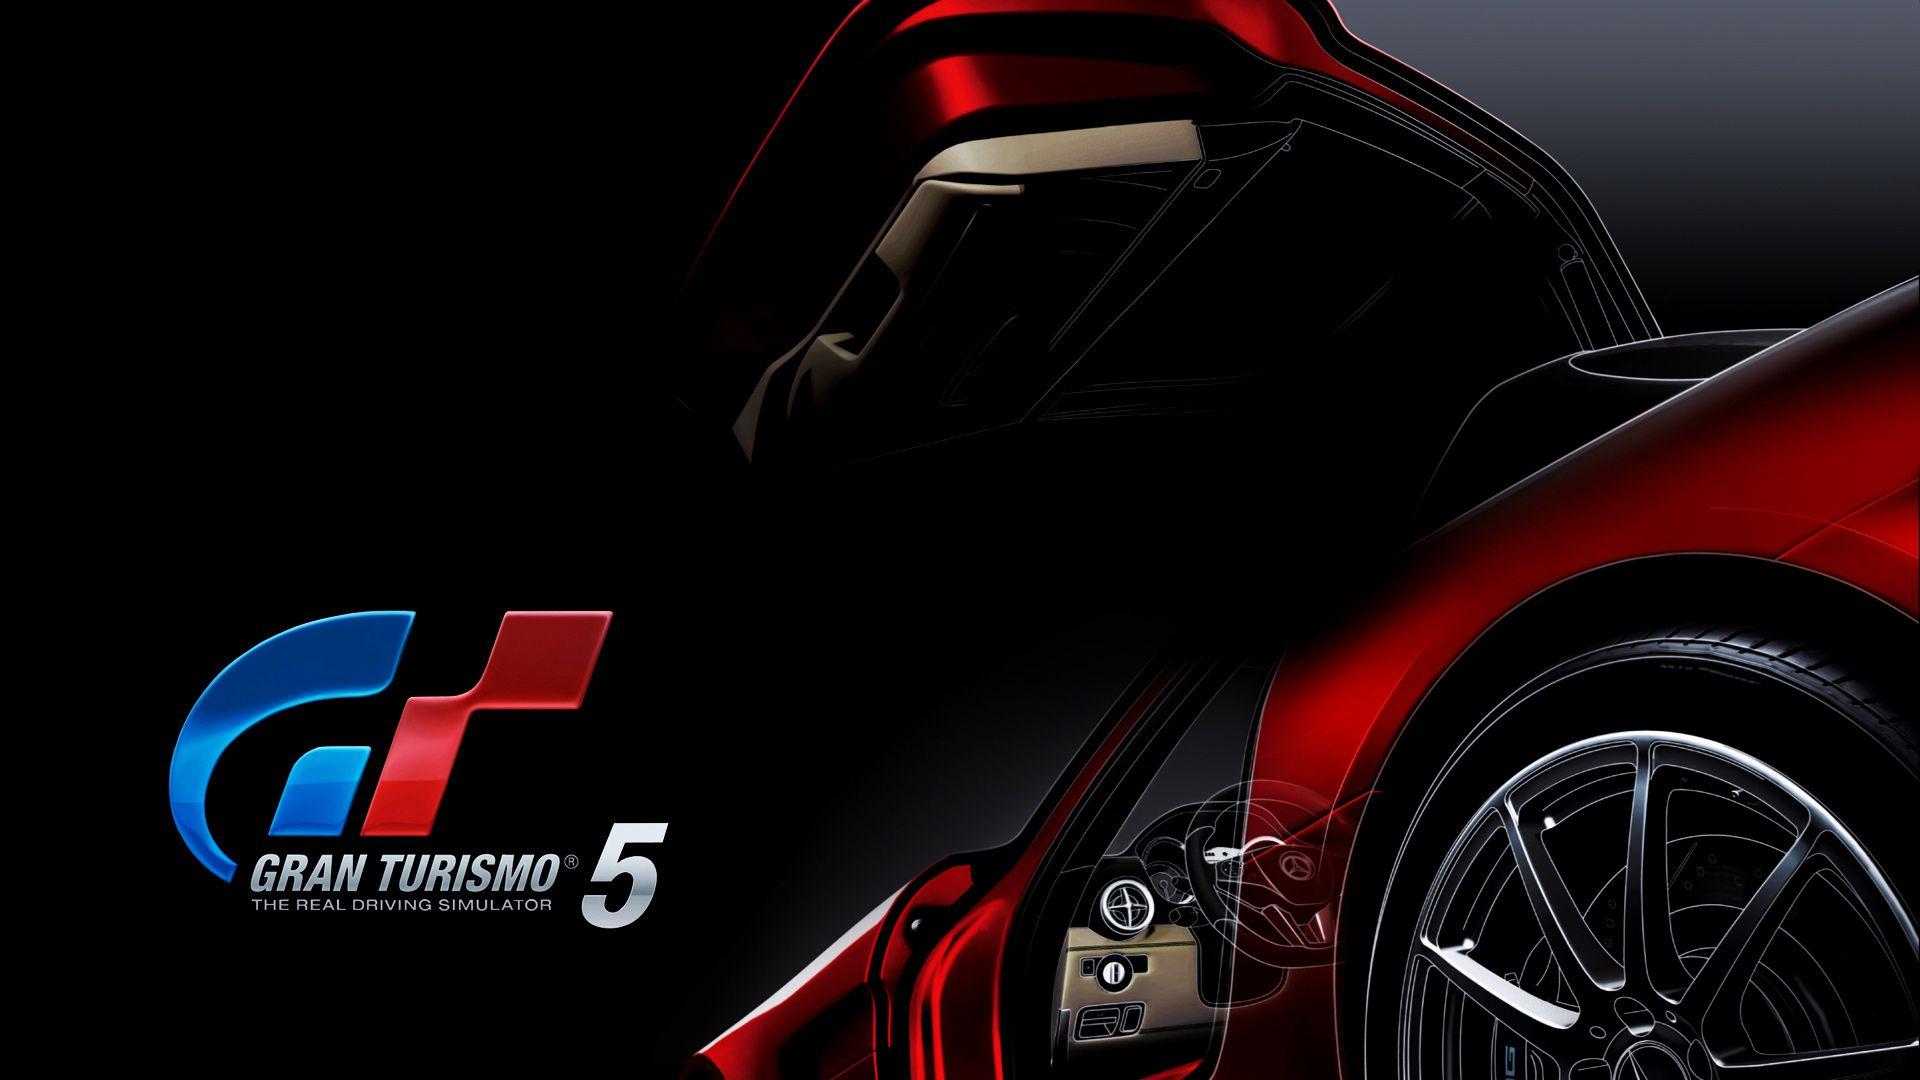 Gran Turismo 5 Full HD Wallpaper and Background Imagex1080